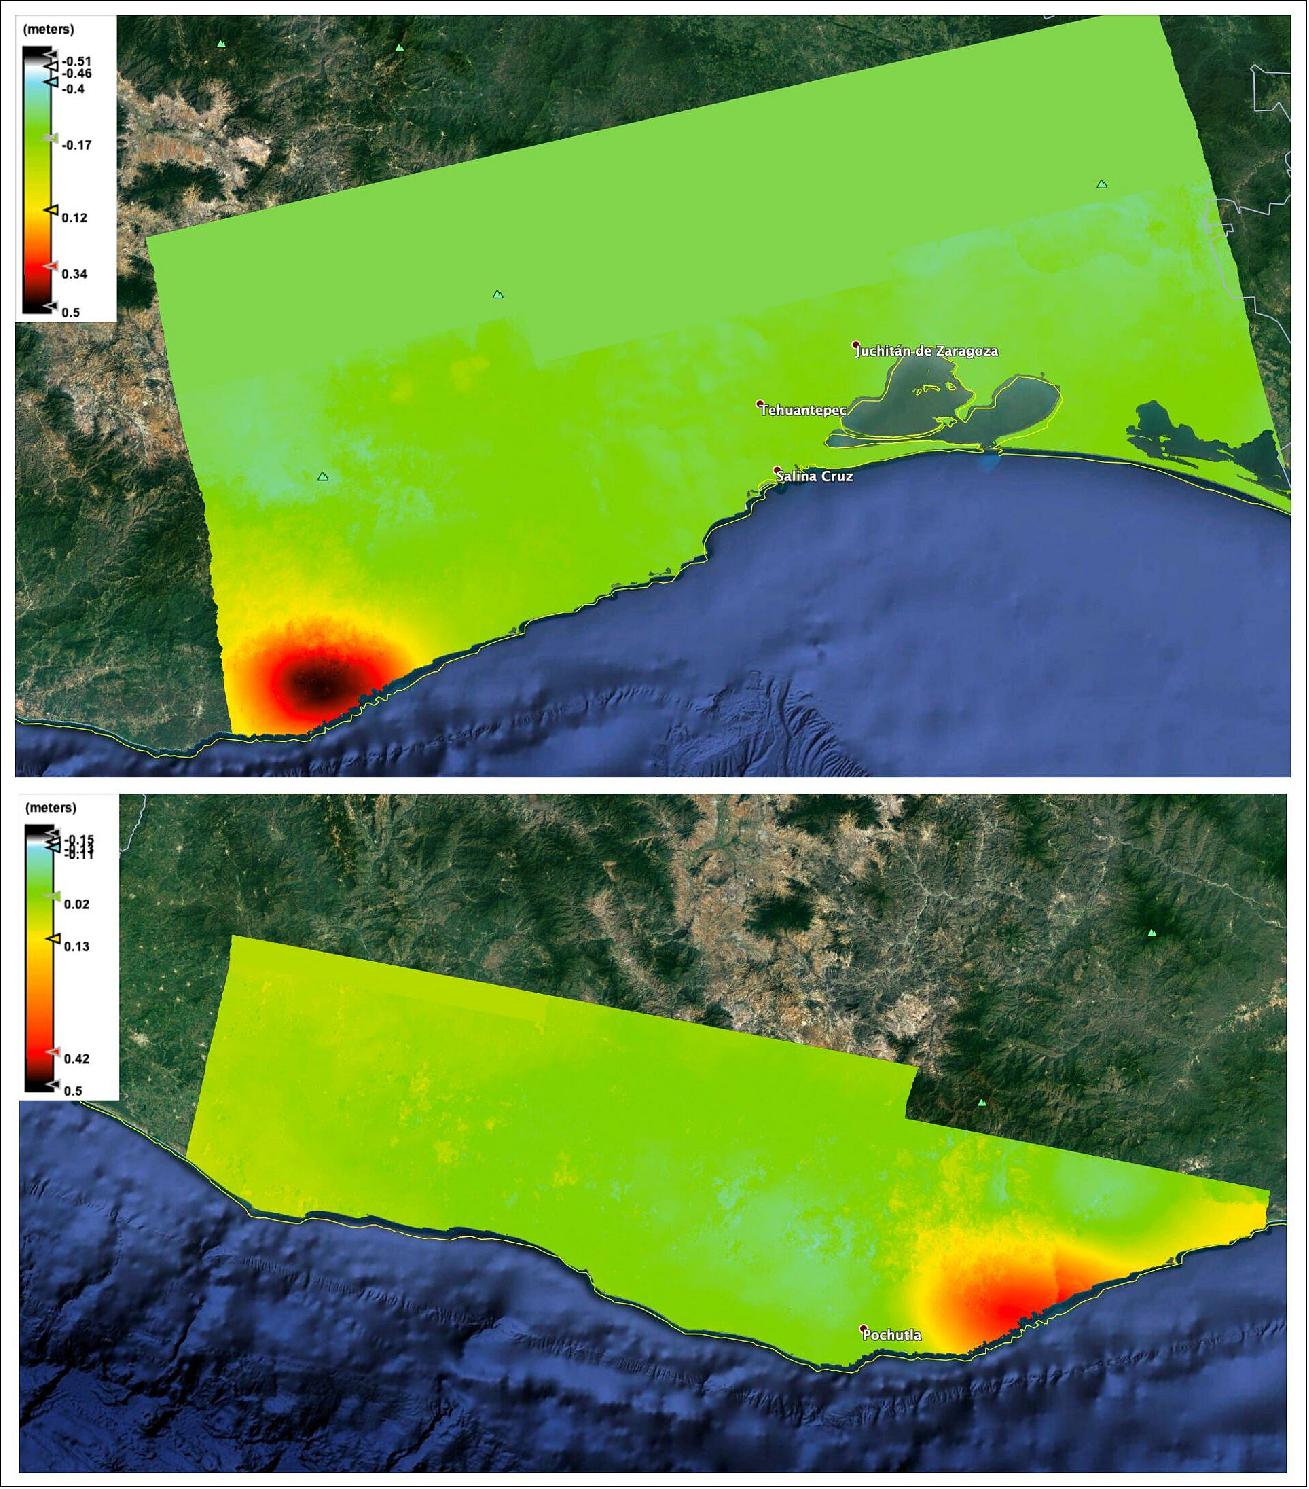 Figure 16: Surface deformation. Displacement measured in the radar line of sight from the descending (top) and ascending (bottom) passes (image credit: ESA, the maps contain modified Copernicus Sentinel data (2020), processed by ESA, CC BY-SA 3.0 IGO)